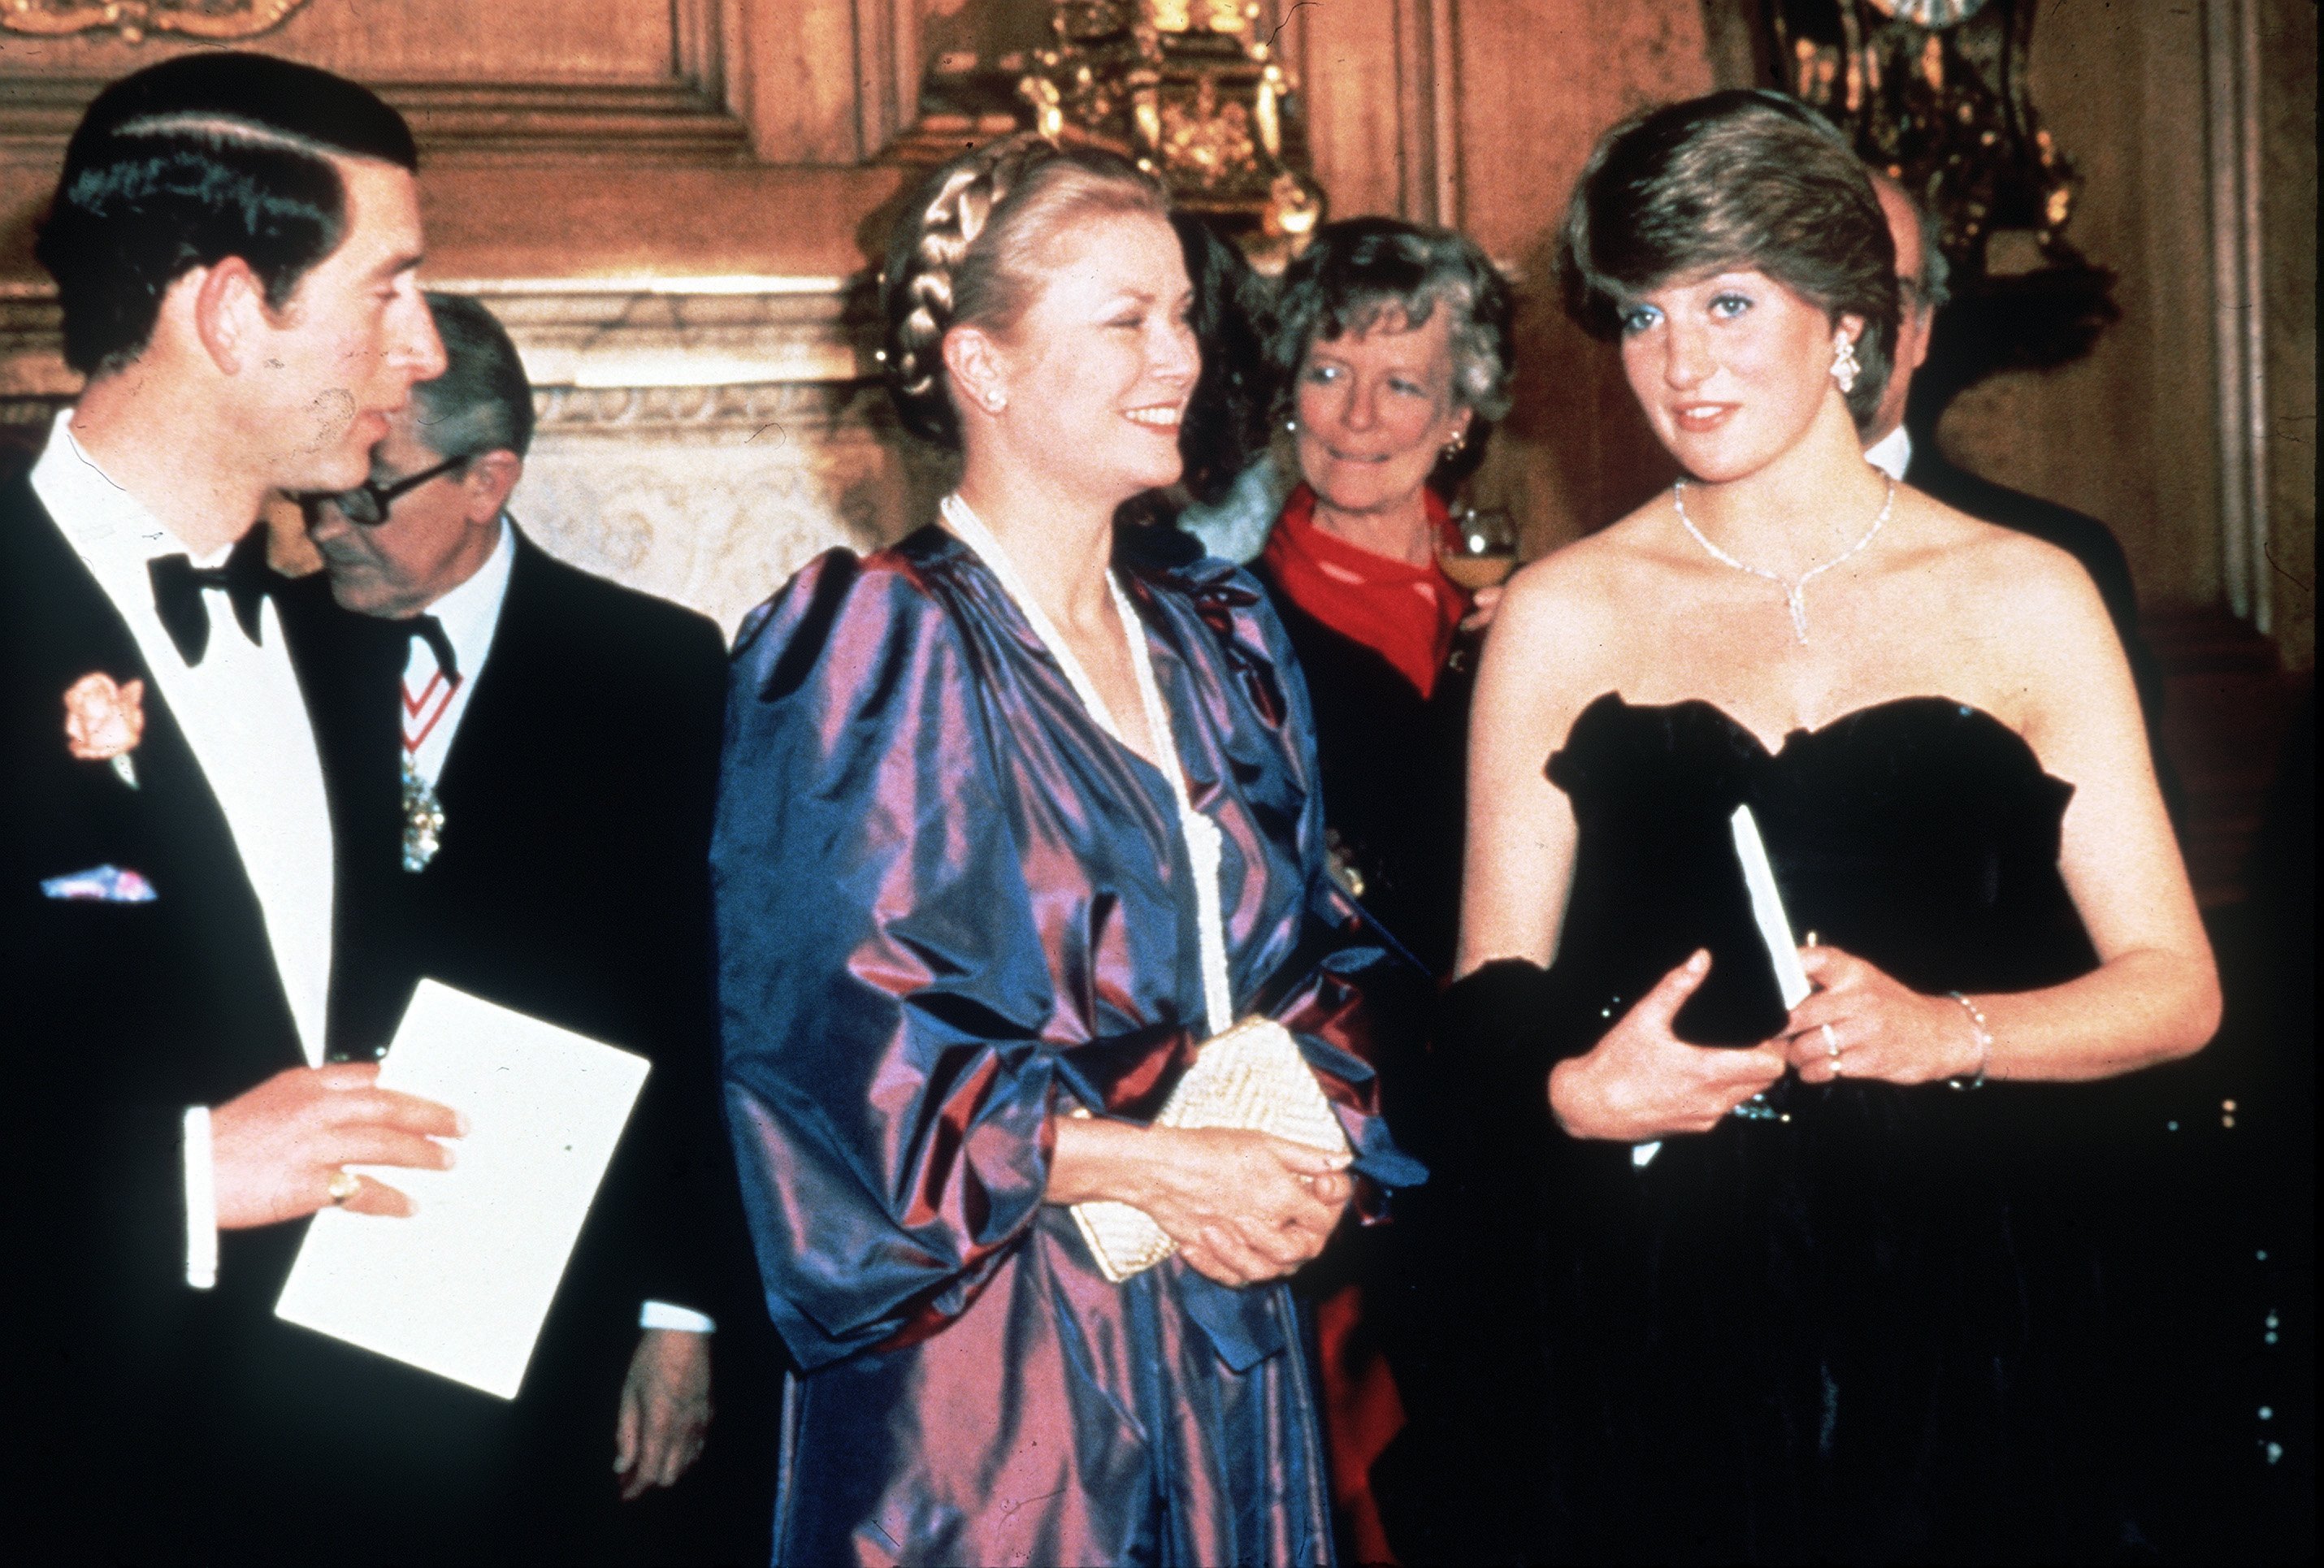 Prince Charles, Lady Diana Spencer, and Princess Grace of Monaco at a fundraising concert and reception on March 9, 1981, in London, United Kingdom. | Source: Anwar Hussein/WireImage/Getty Images